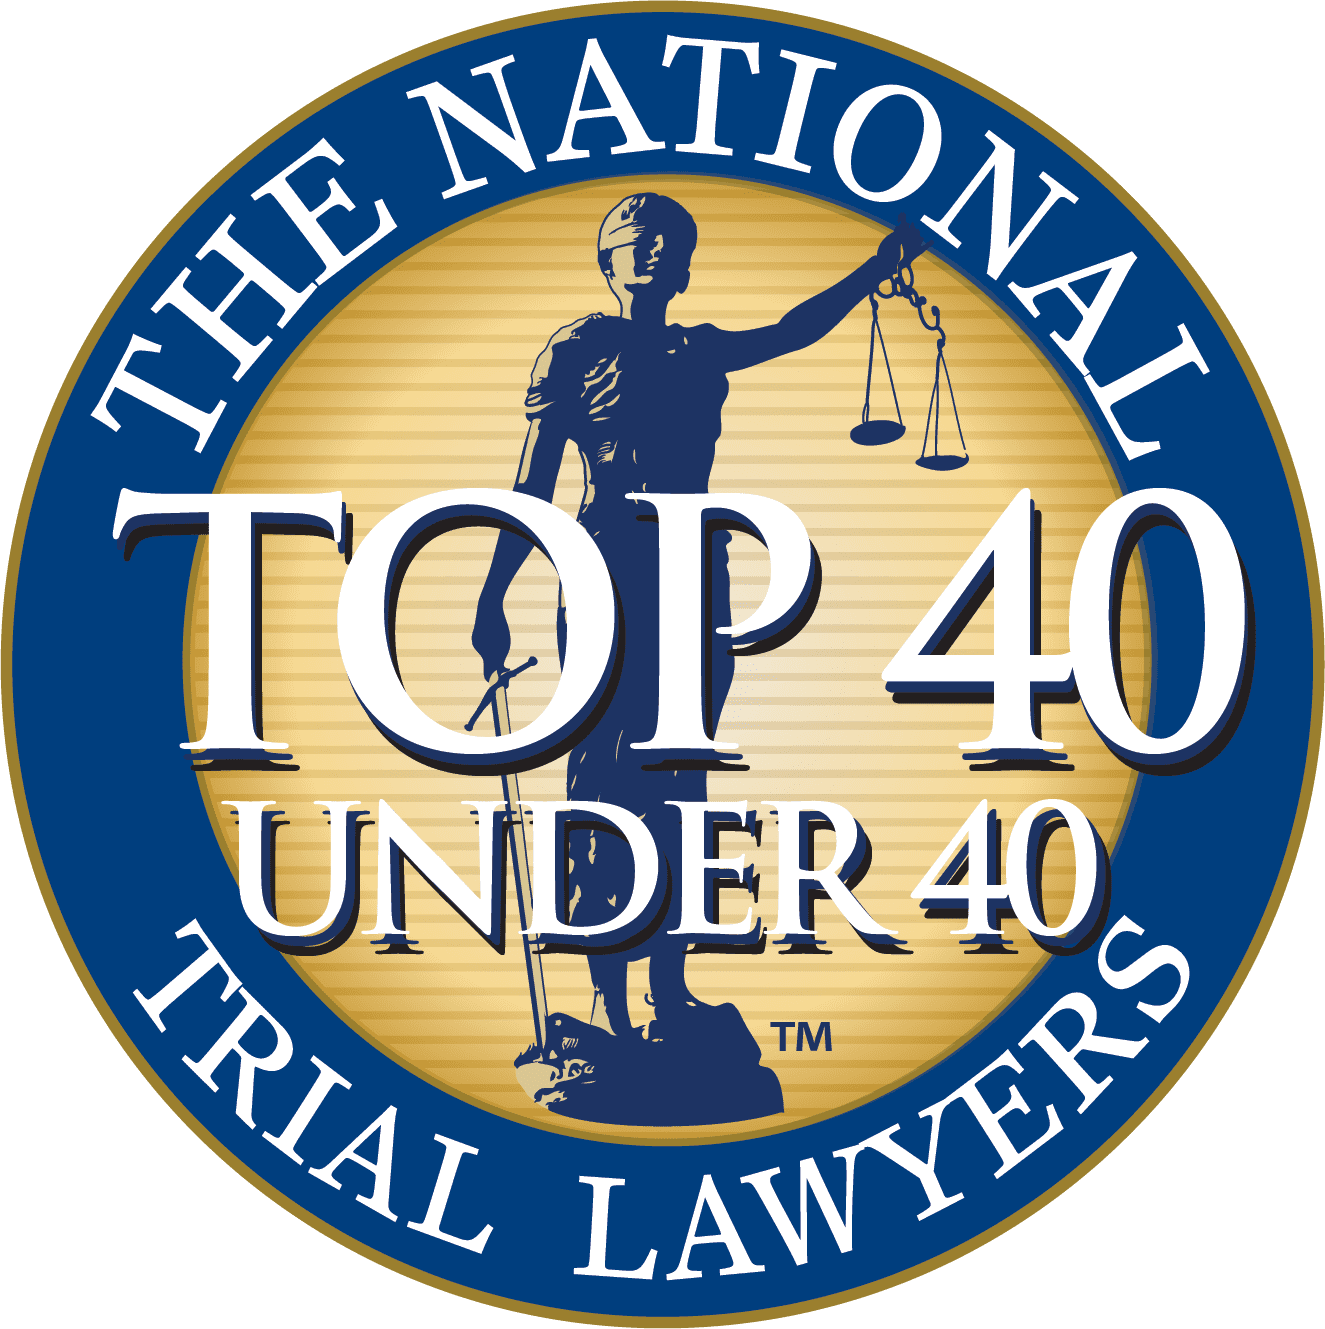 The National Trial lawyers Top 40 under 40